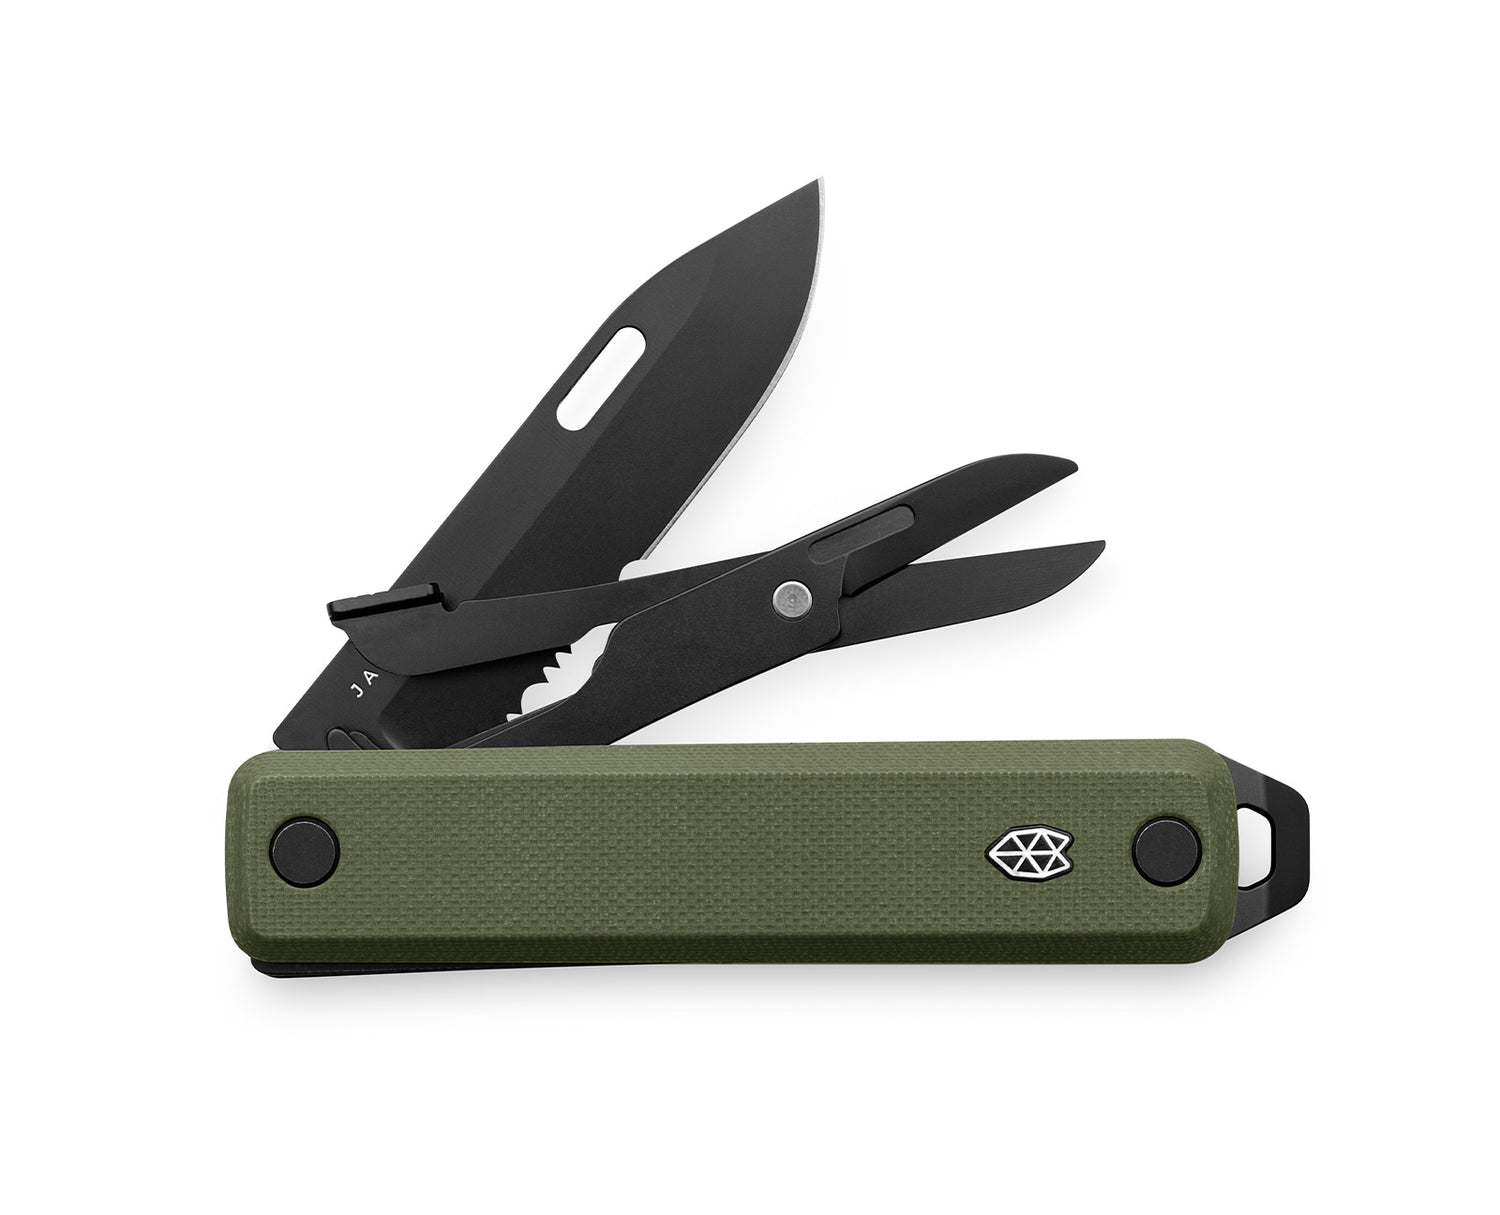 The Ellis multi-tool with OD green handle and black tools.